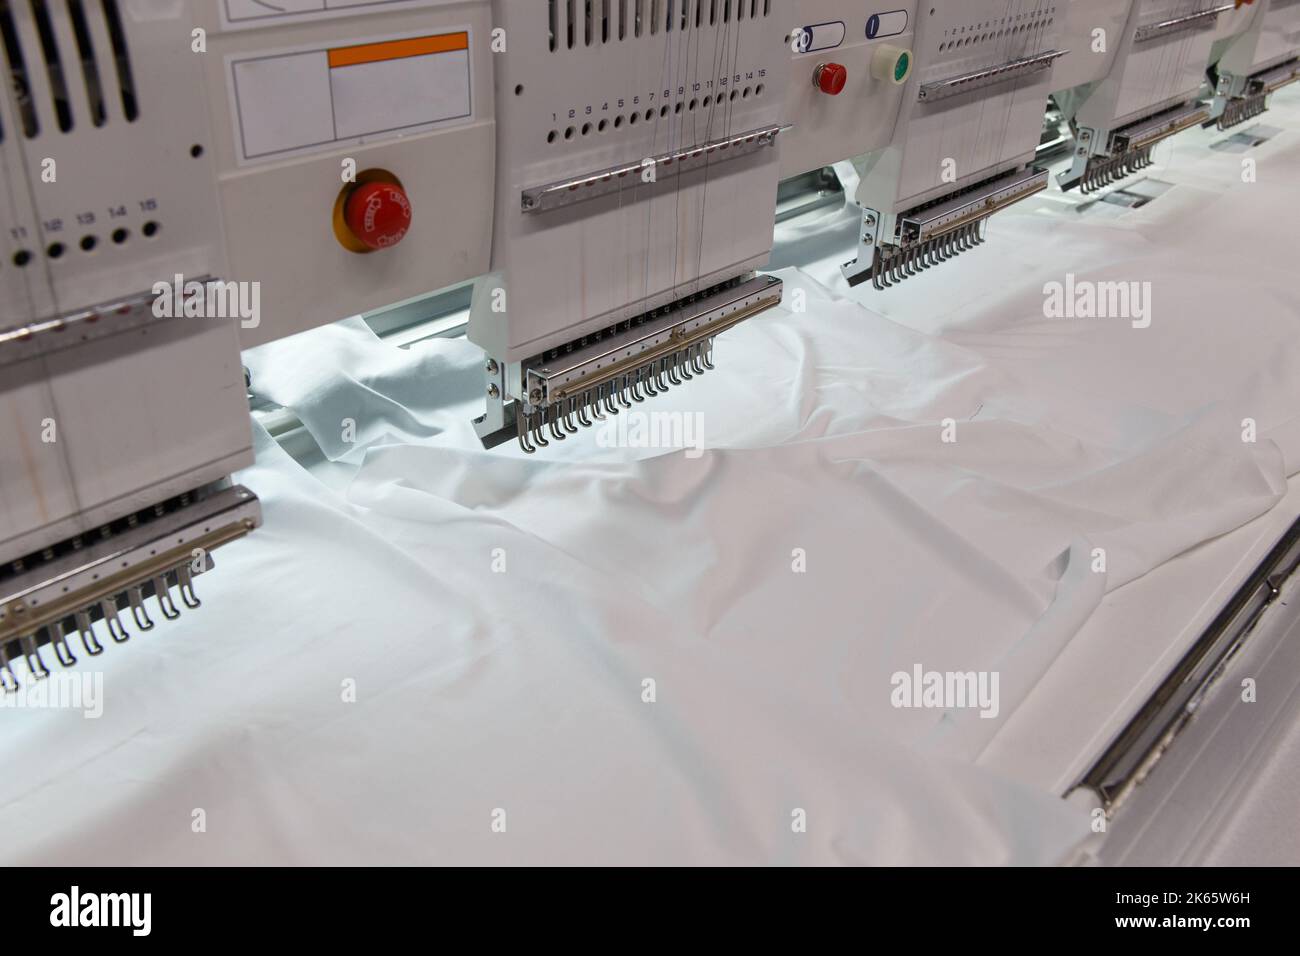 Machine embroidery is an embroidery process whereby a sewing machine or embroidery machine is used to create patterns on textiles. Textile: Industrial Stock Photo